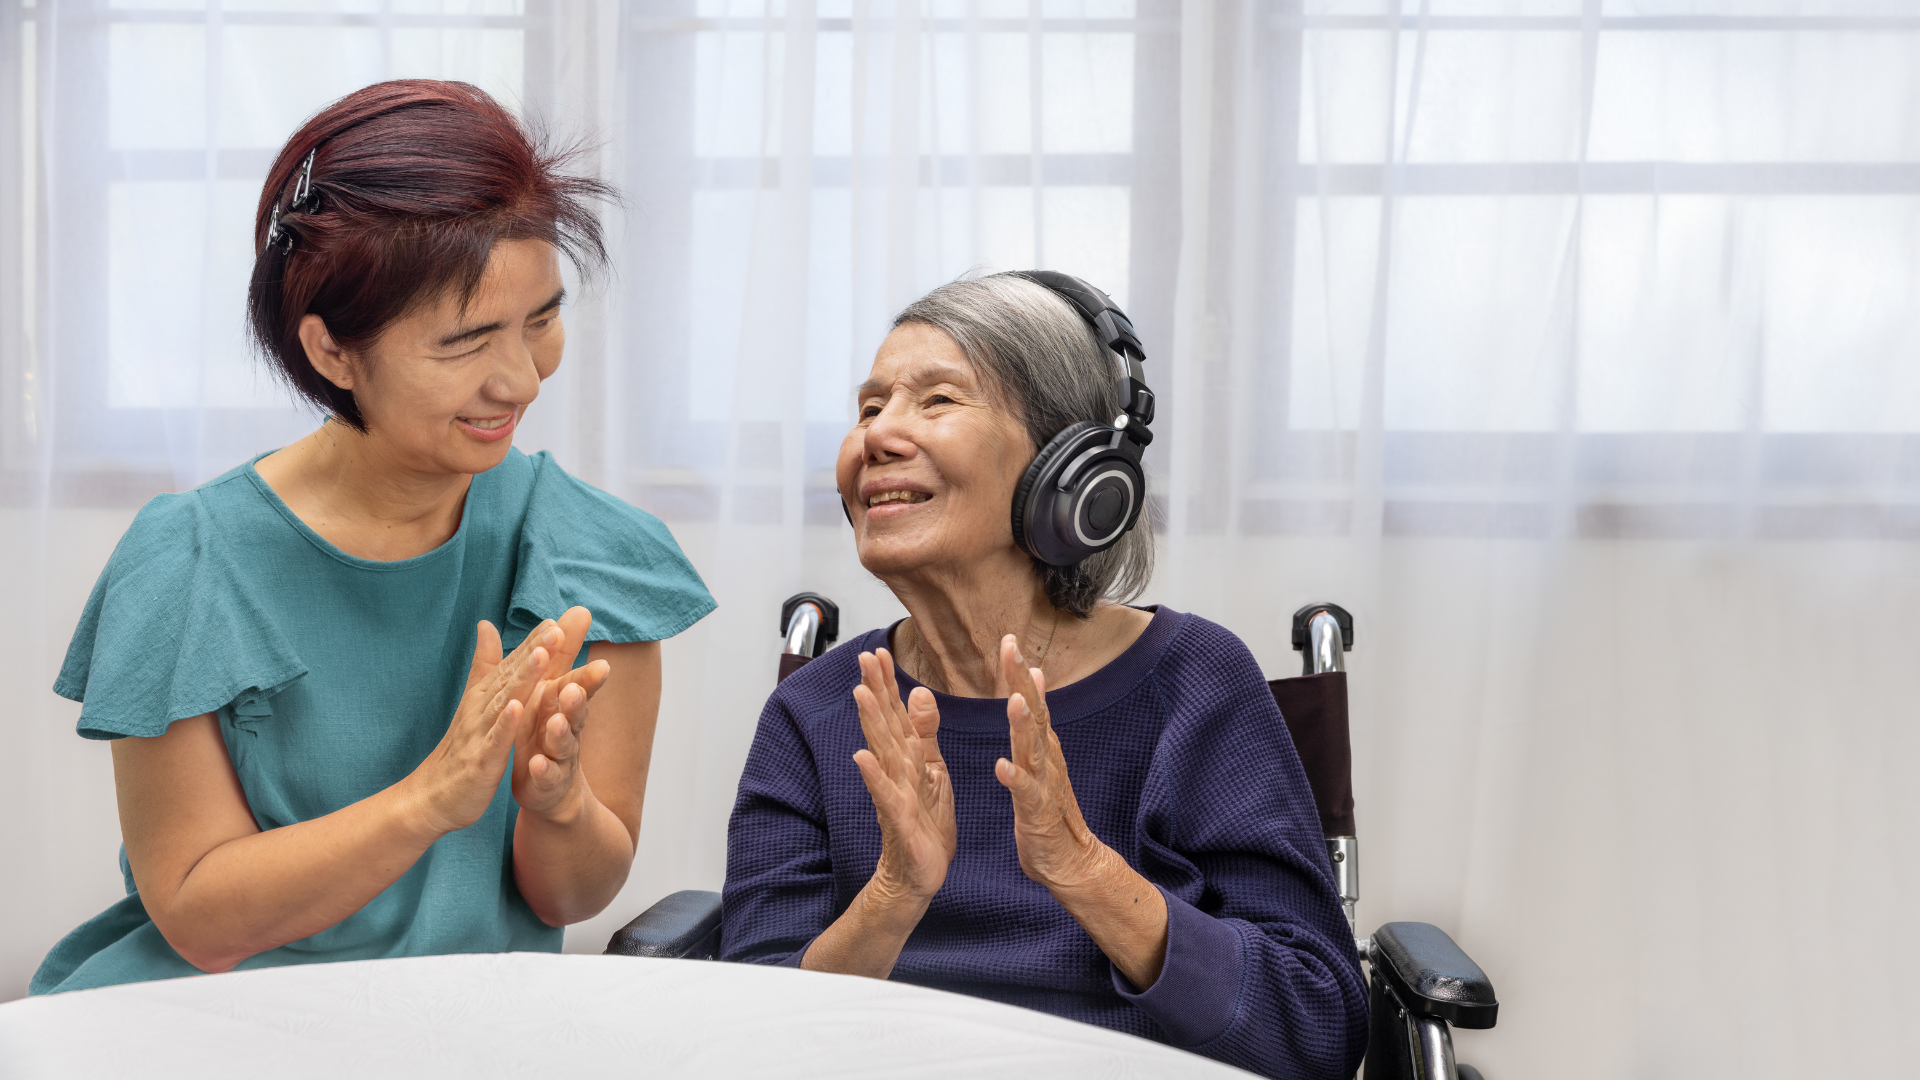 Music therapy in dementia treatment on anelderly woman.